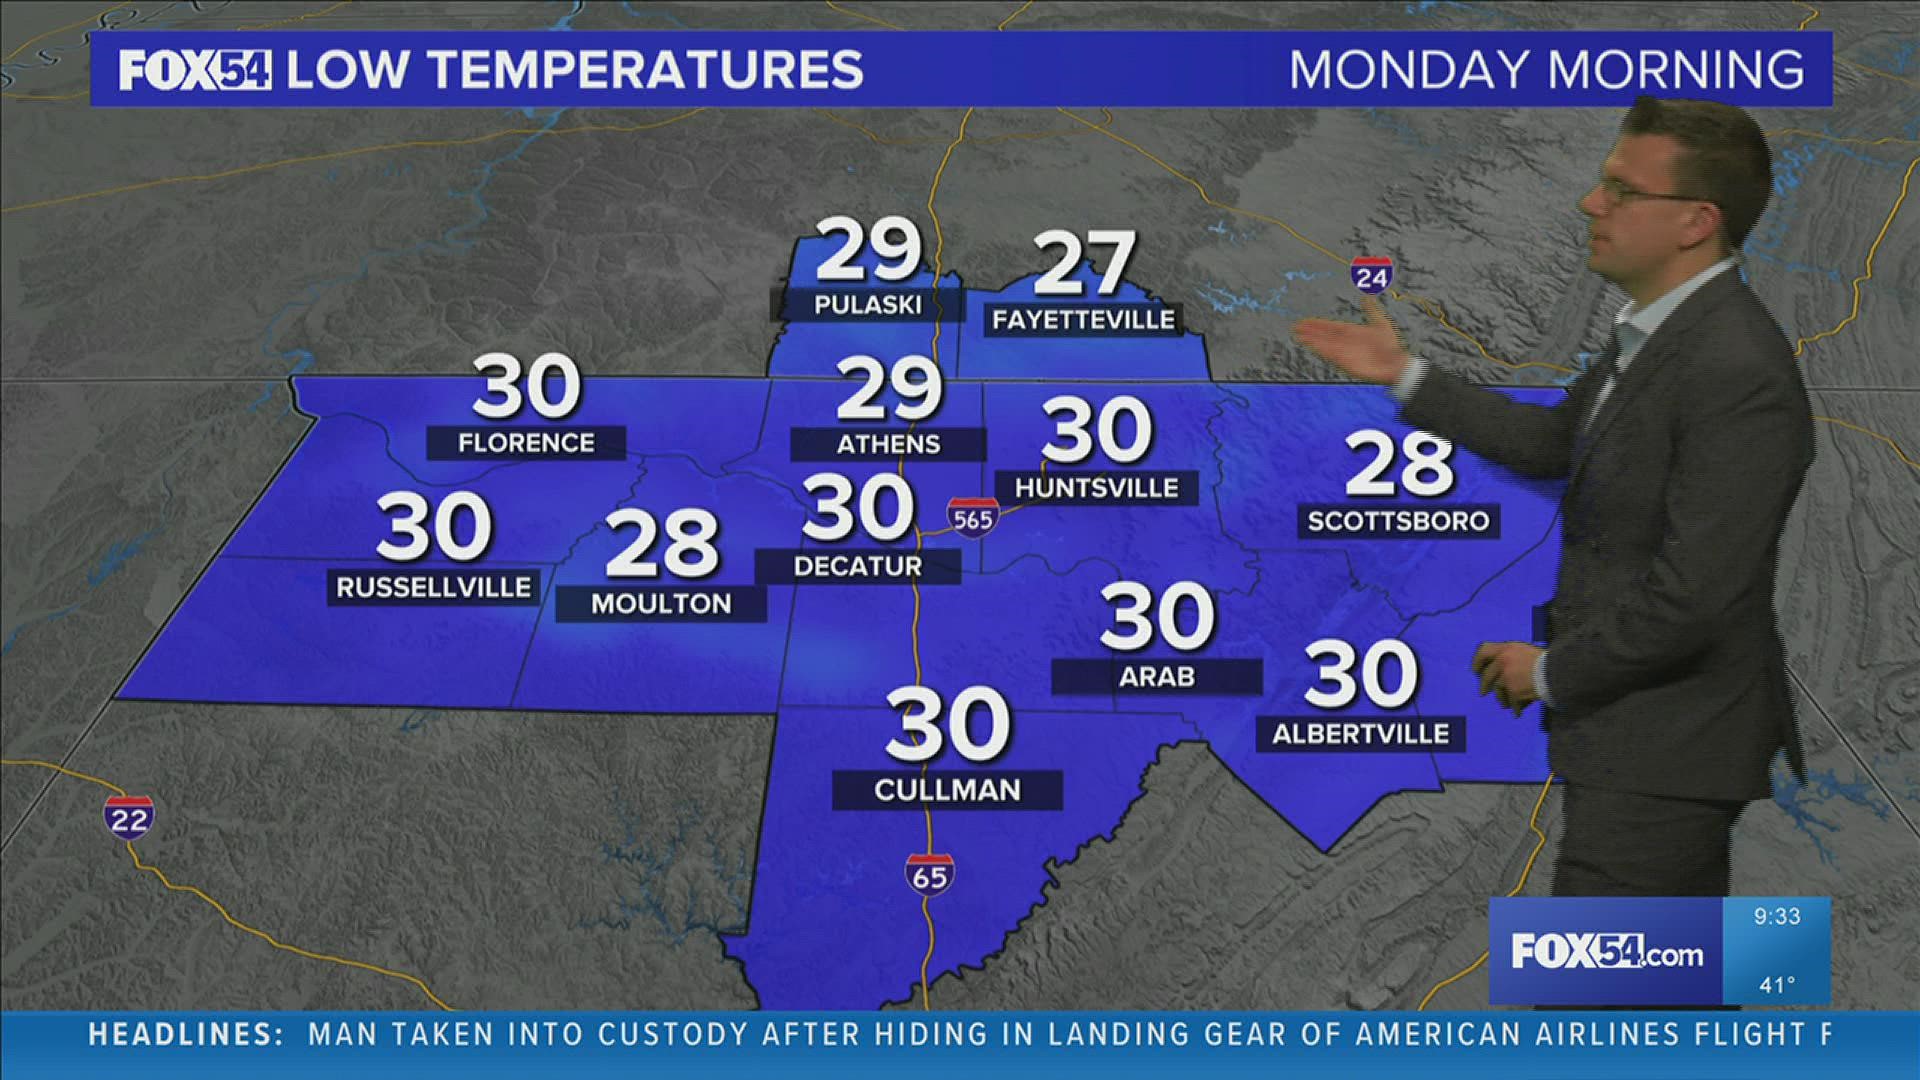 A cold start to the new week across the Tennessee Valley.